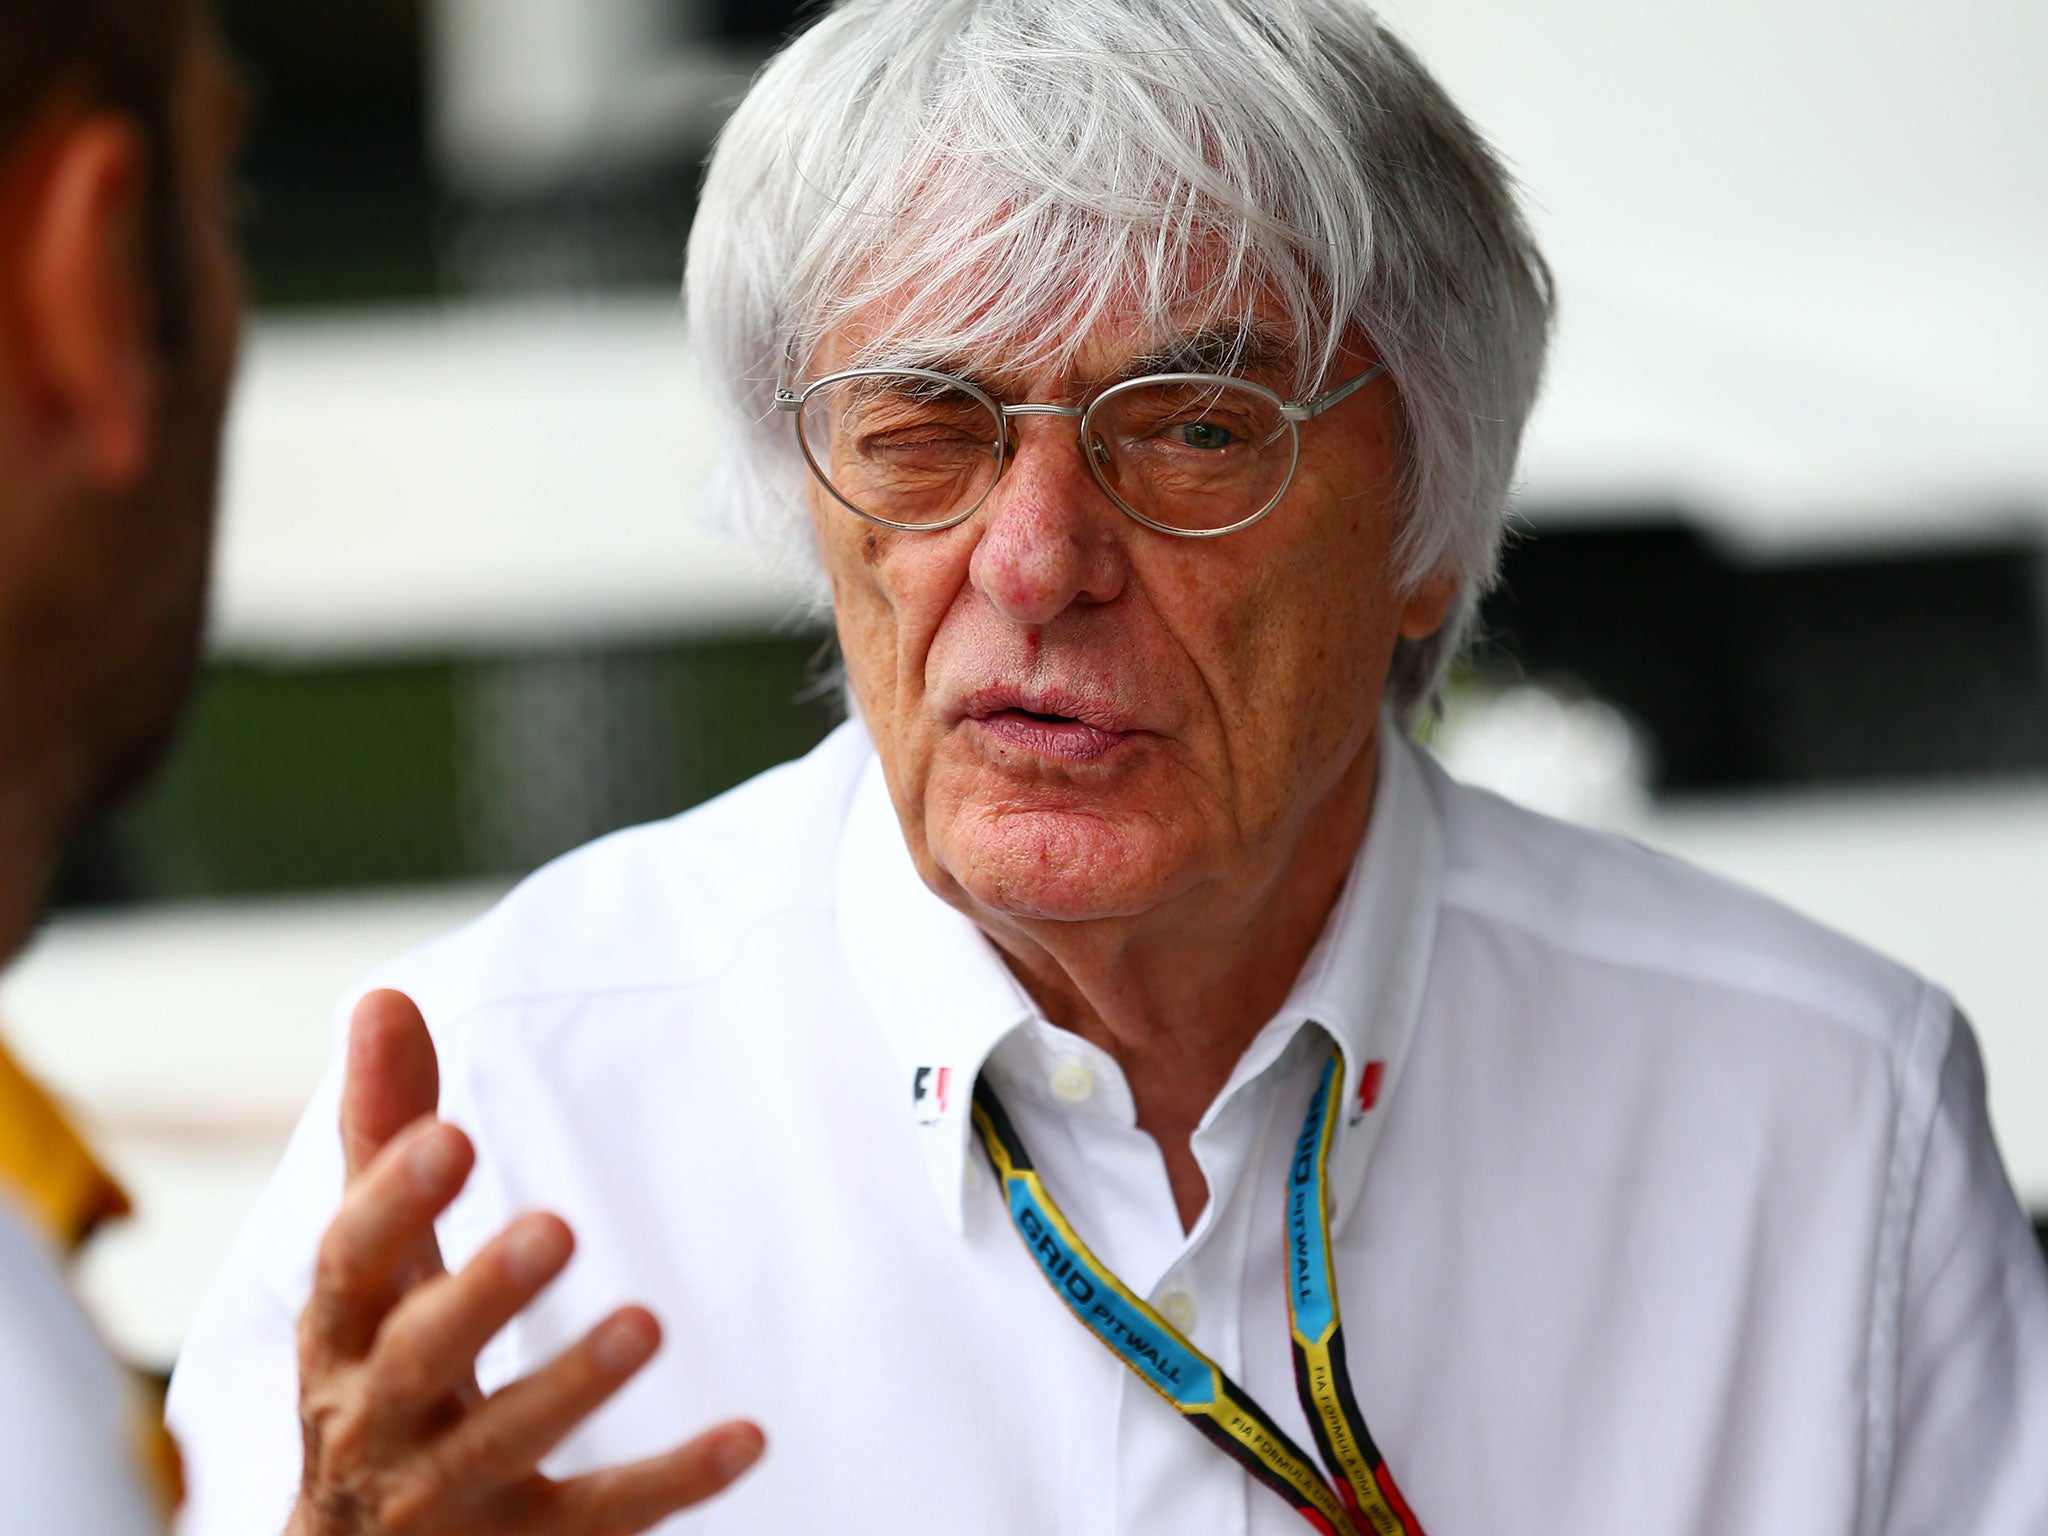 Bernie Ecclestone had introduced double points to maintain interest until the final race of the season